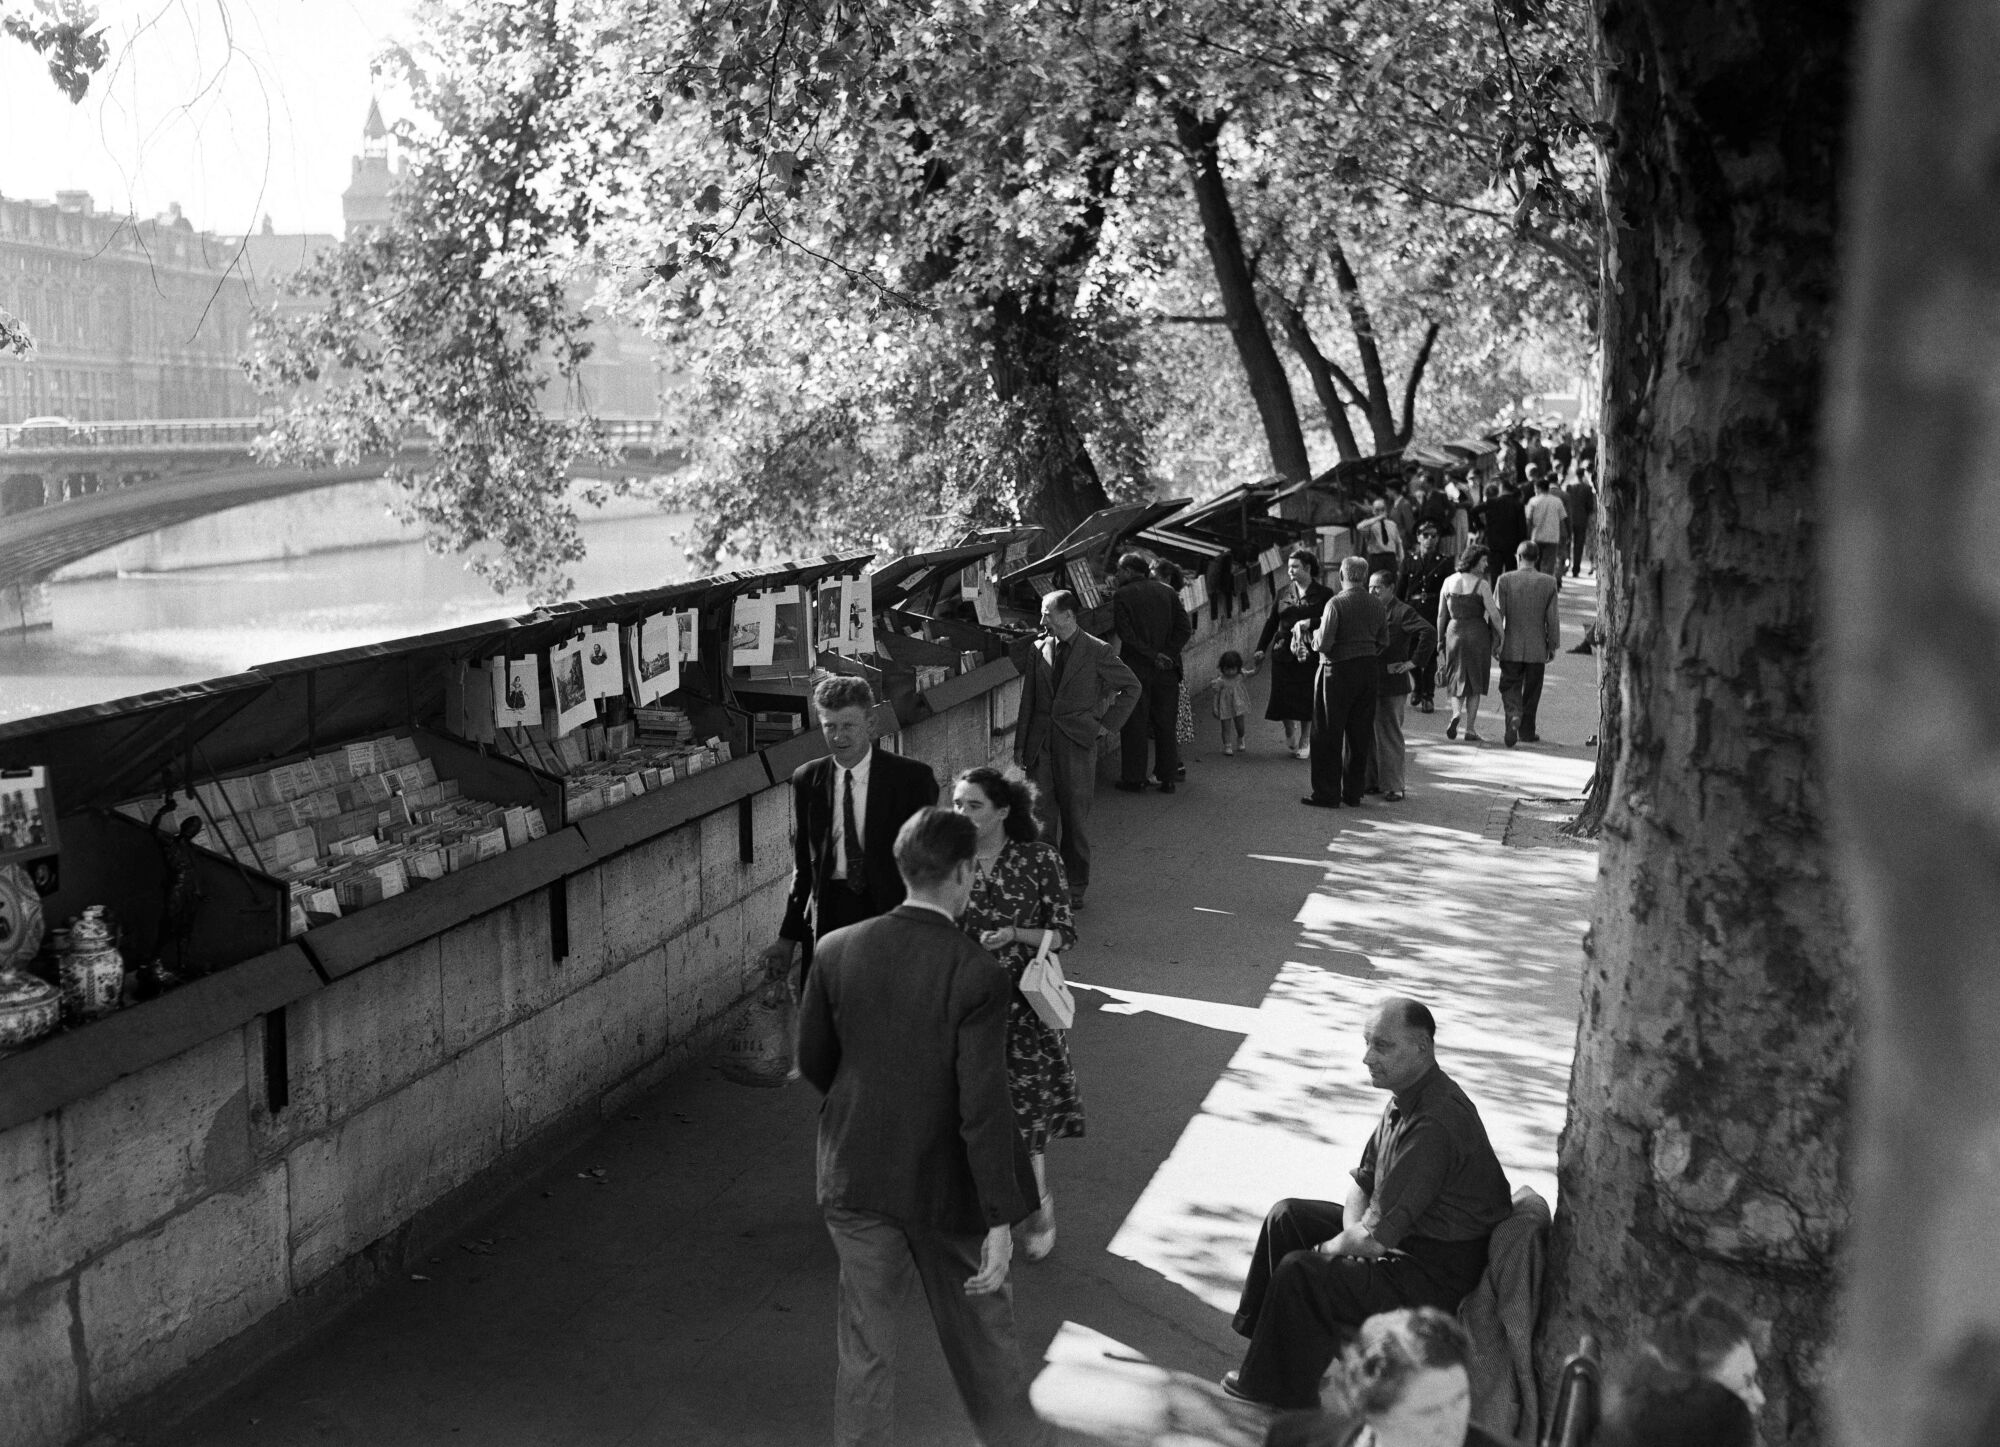 Parisians and tourists strolling along the banks of the Seine river in a black-and-white photo.